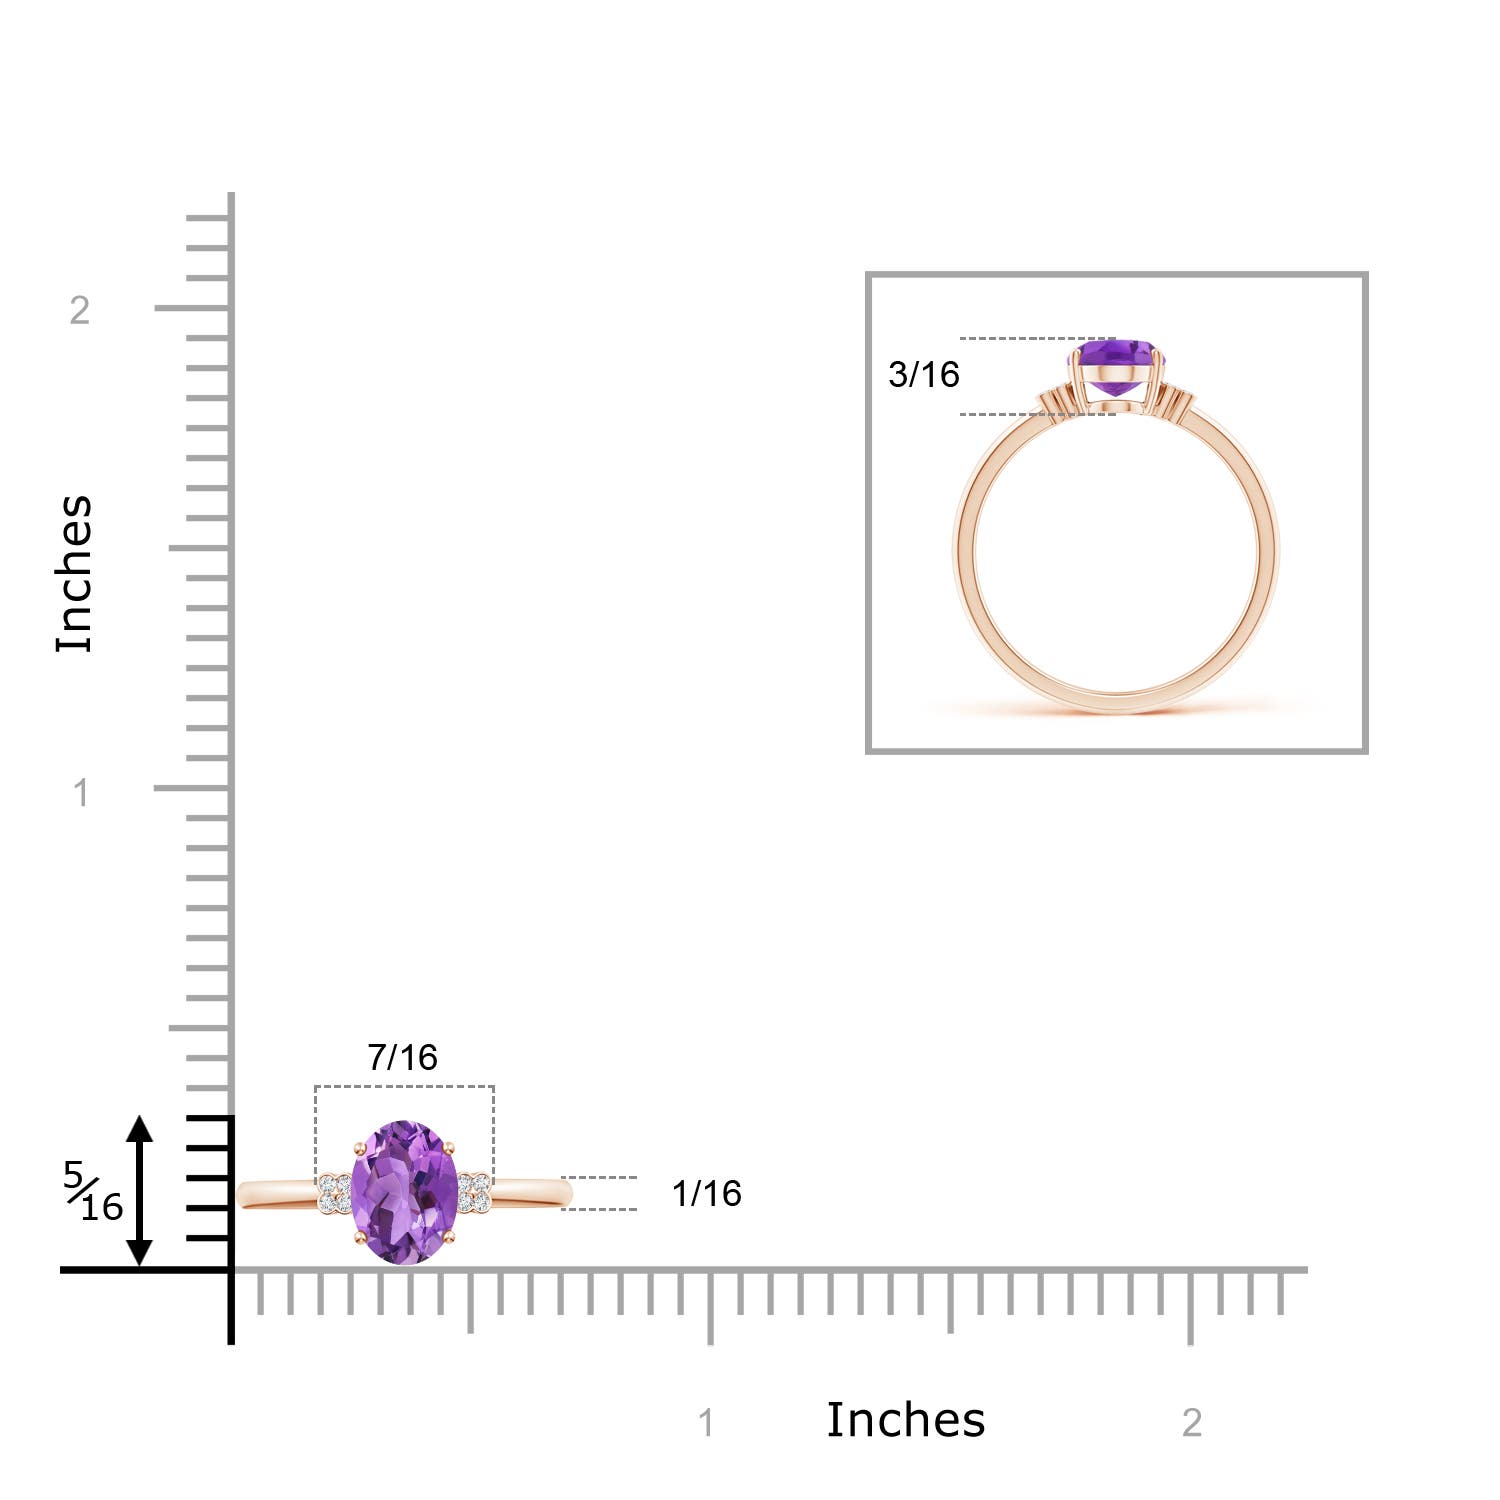 AA- Amethyst / 1.2 CT / 14 KT Rose Gold